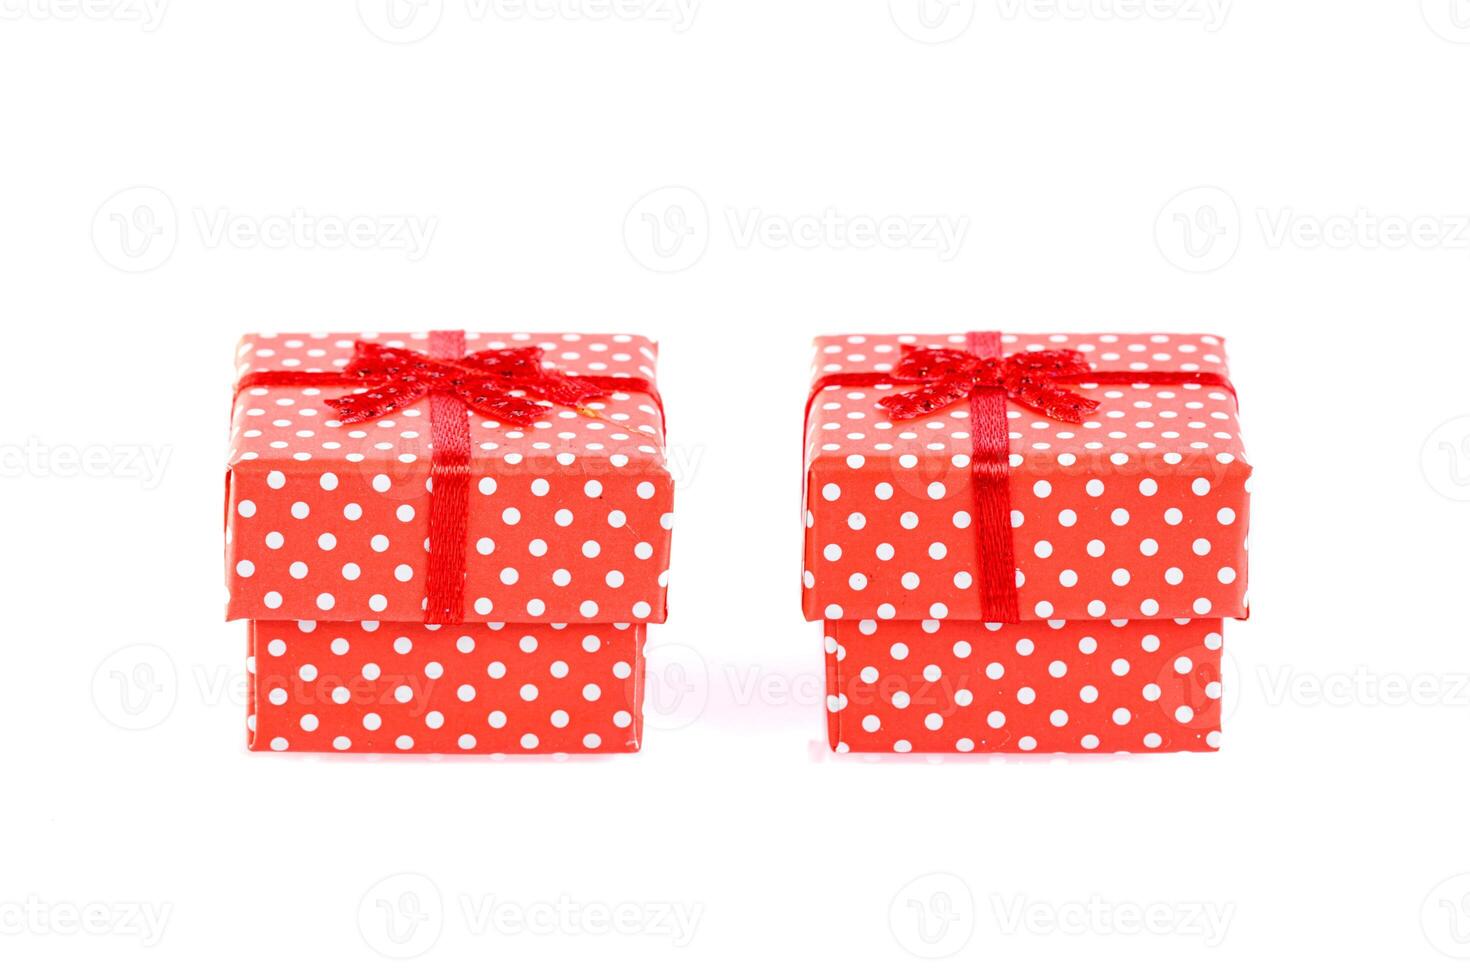 beautiful new year red gift boxes on white background photo